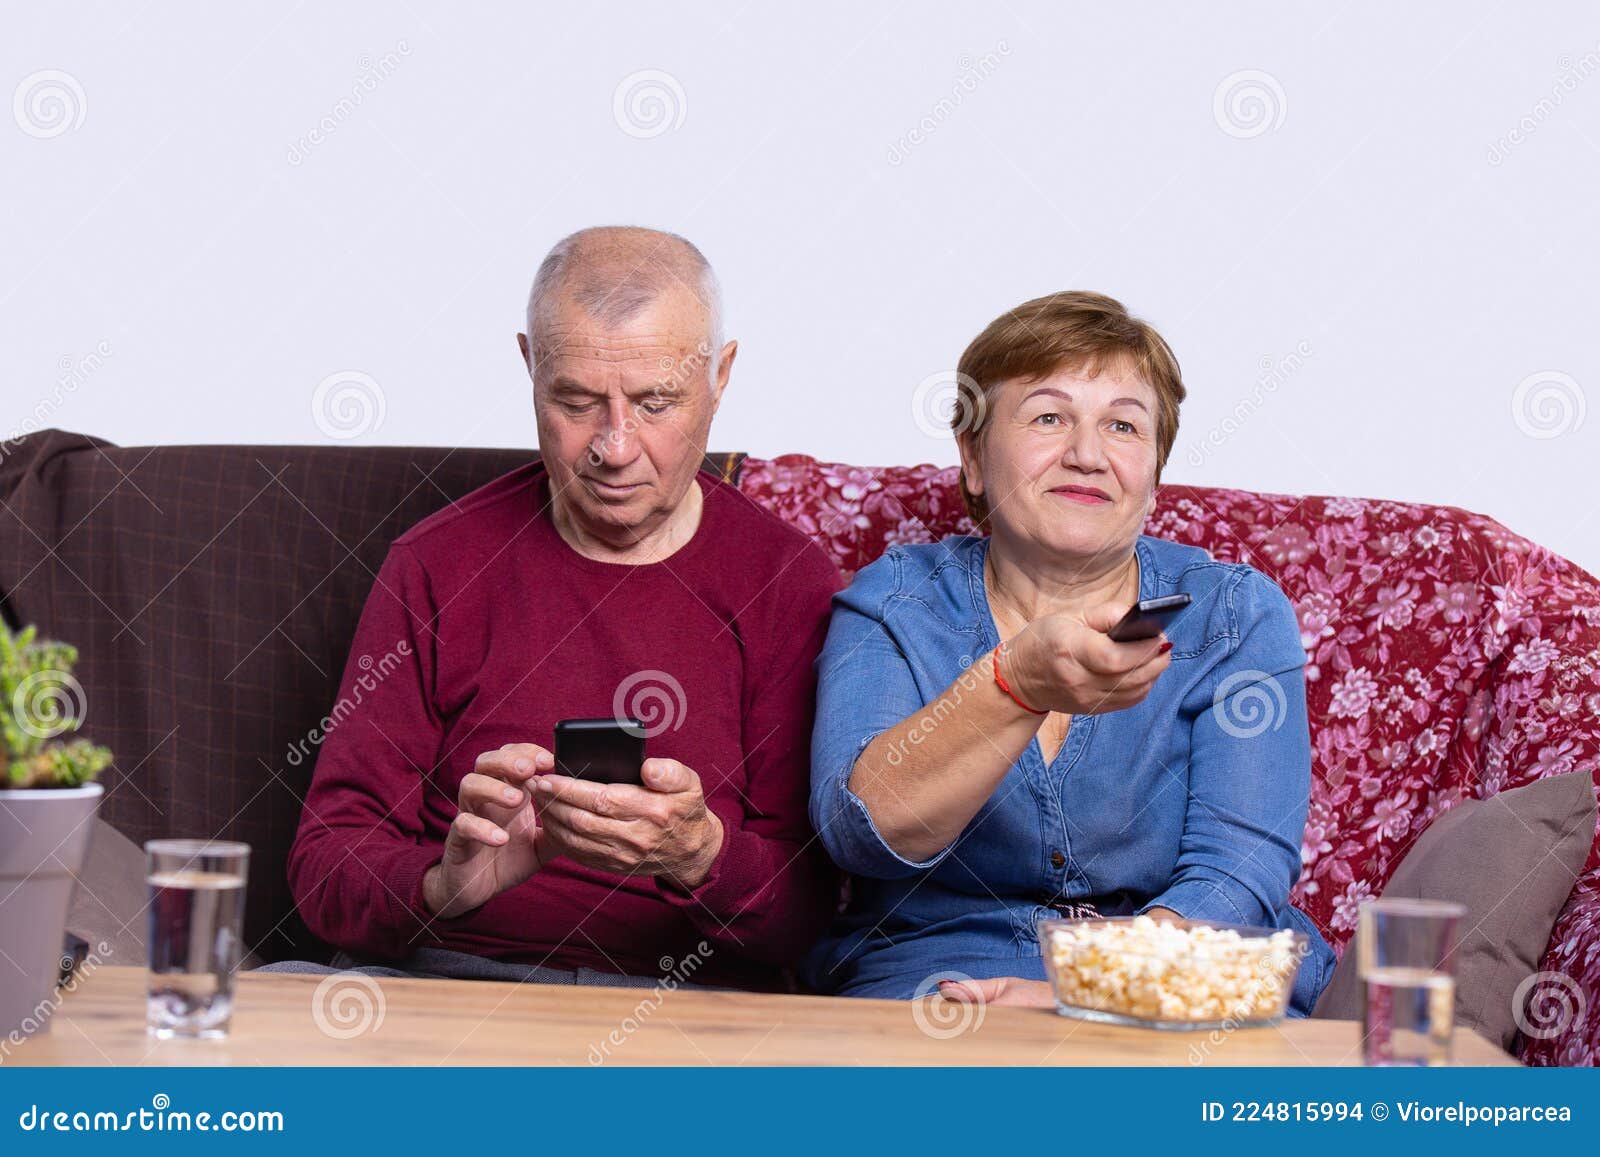 An Old Nice Couple are Resting Sitting on the Sofa, Wife is Switch